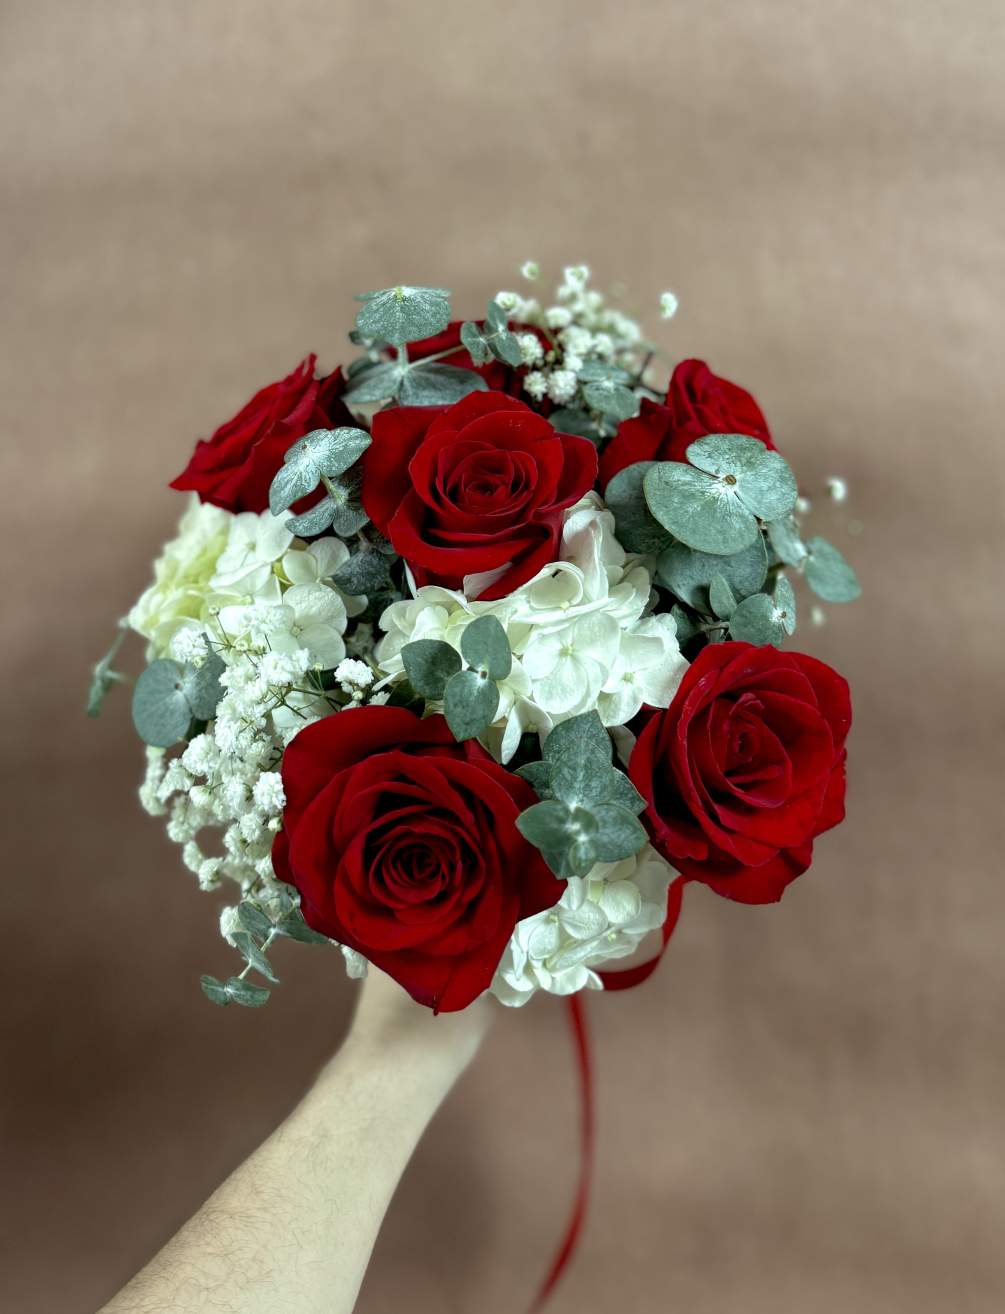 -Rose
-Hydrangea
--Eucalyptus
We customize the colors for your preference. 
